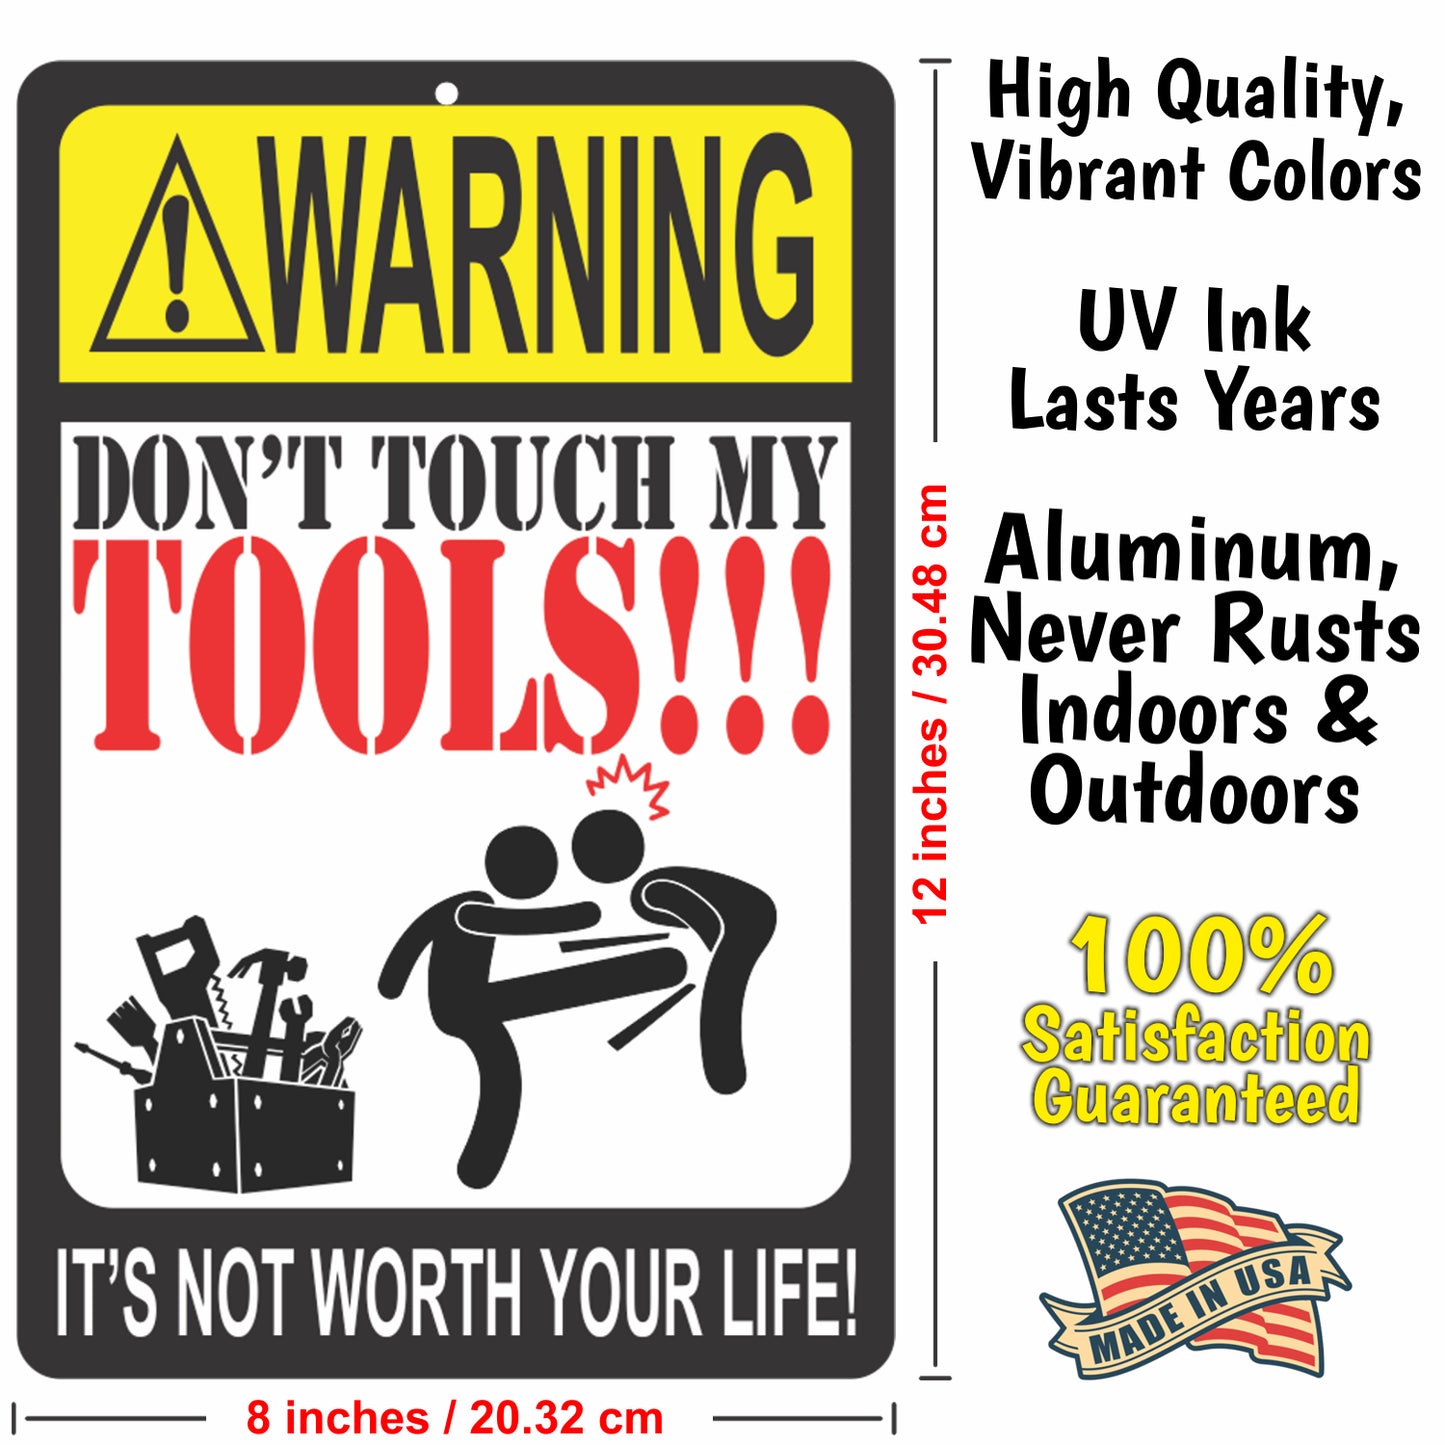 Funny Warning Sign - Don't Touch My Tools!!! It's not Worth Your Life! Metal Warning Sign - Size 8 x 12